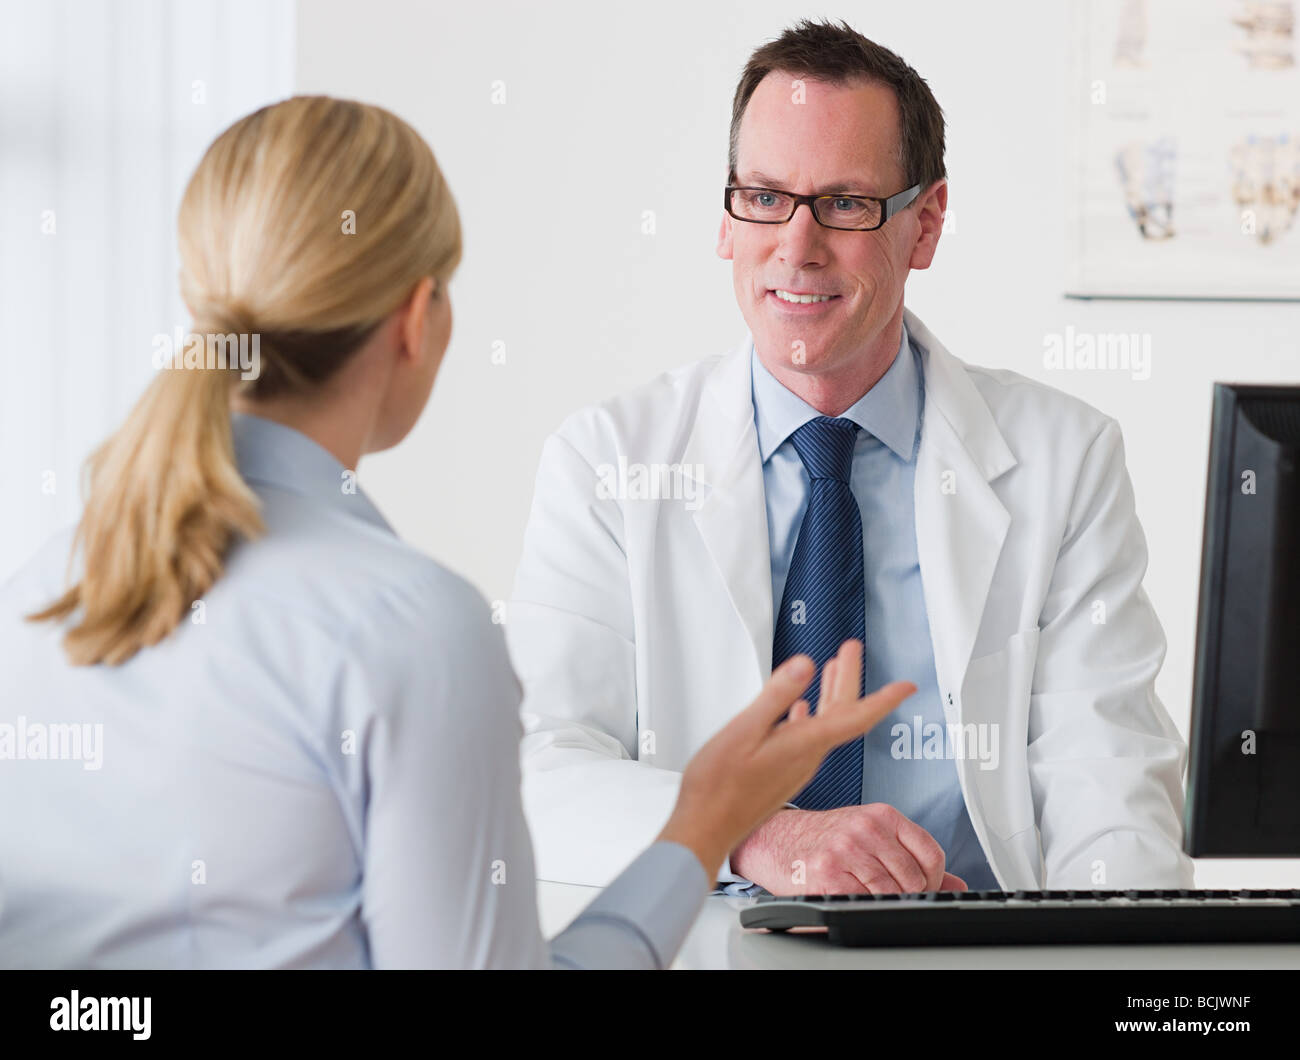 Woman talking to a doctor Stock Photo